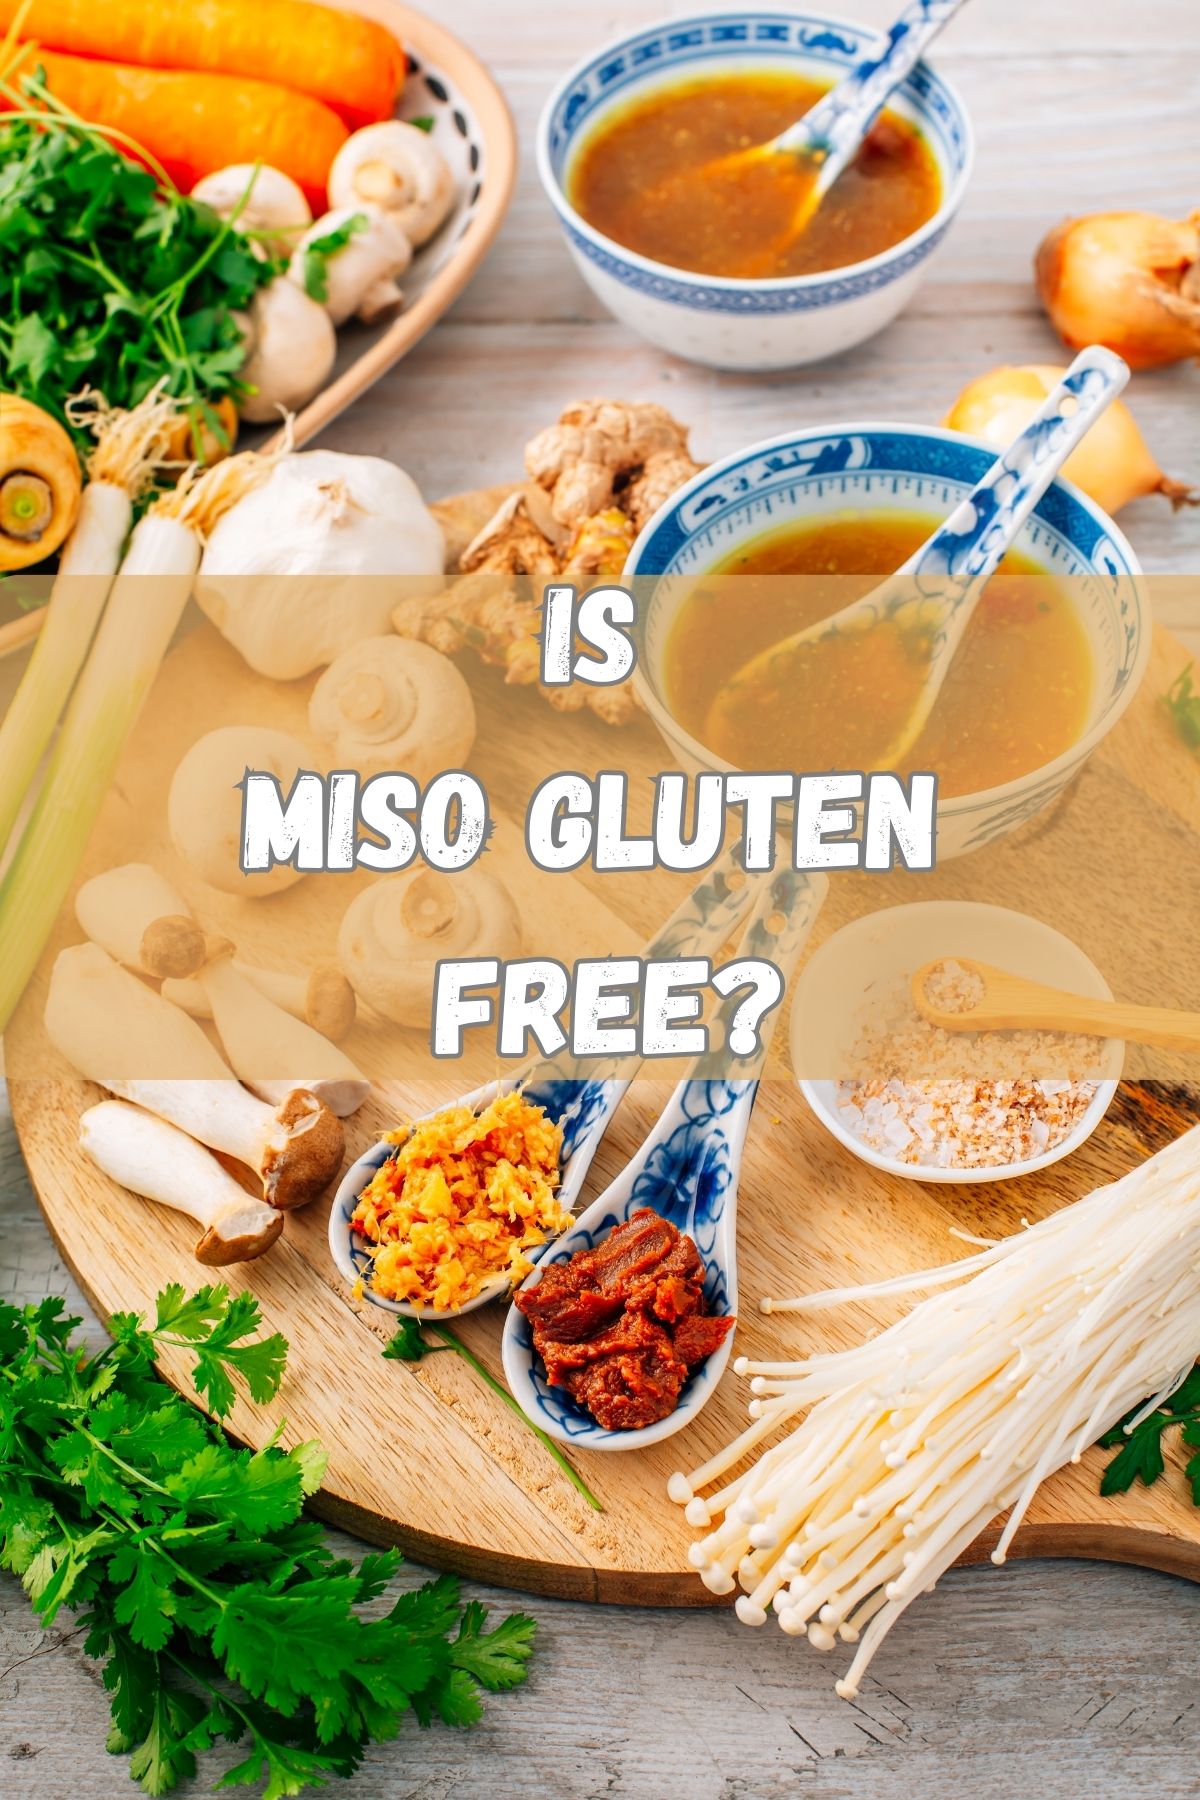 Is Miso gluten free? Miso paste on spoons and bowls of miso soup